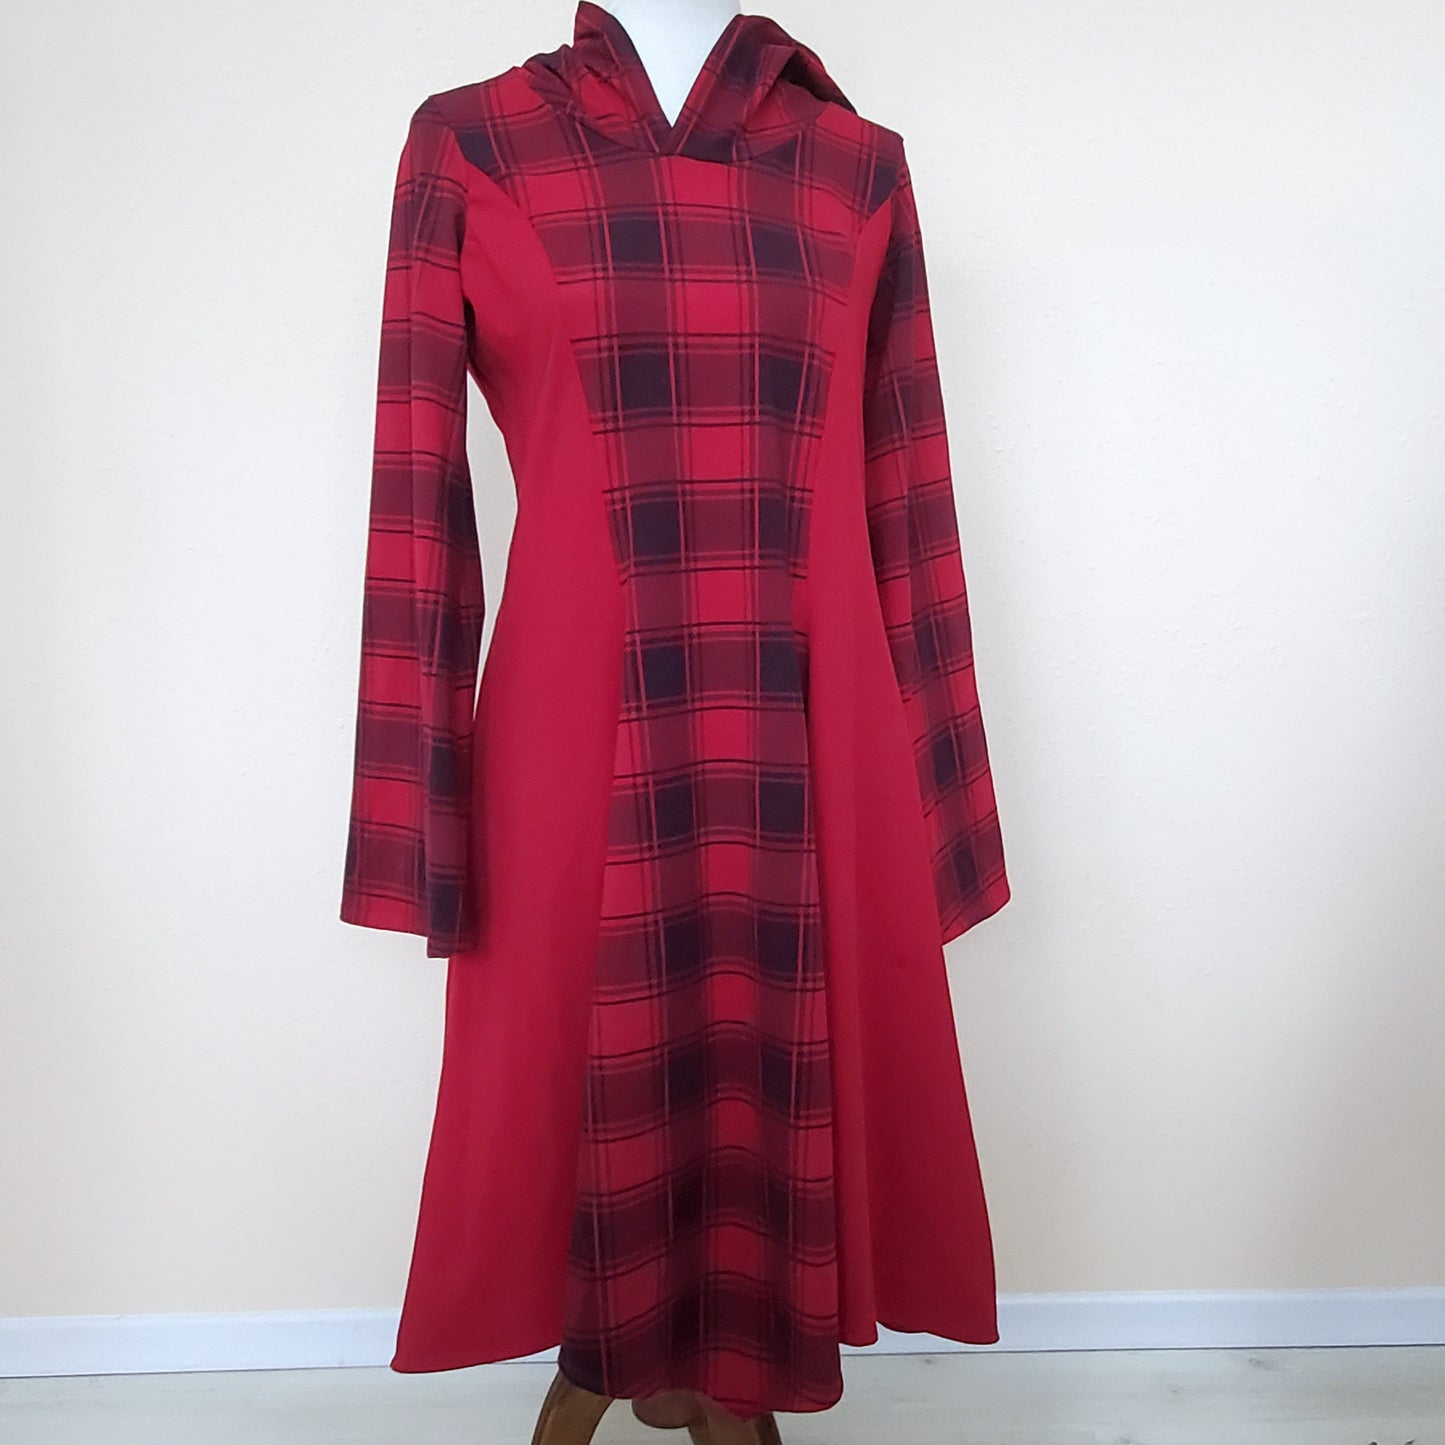 Plaid Hoodie Dress for Kids in a Variety of Colors